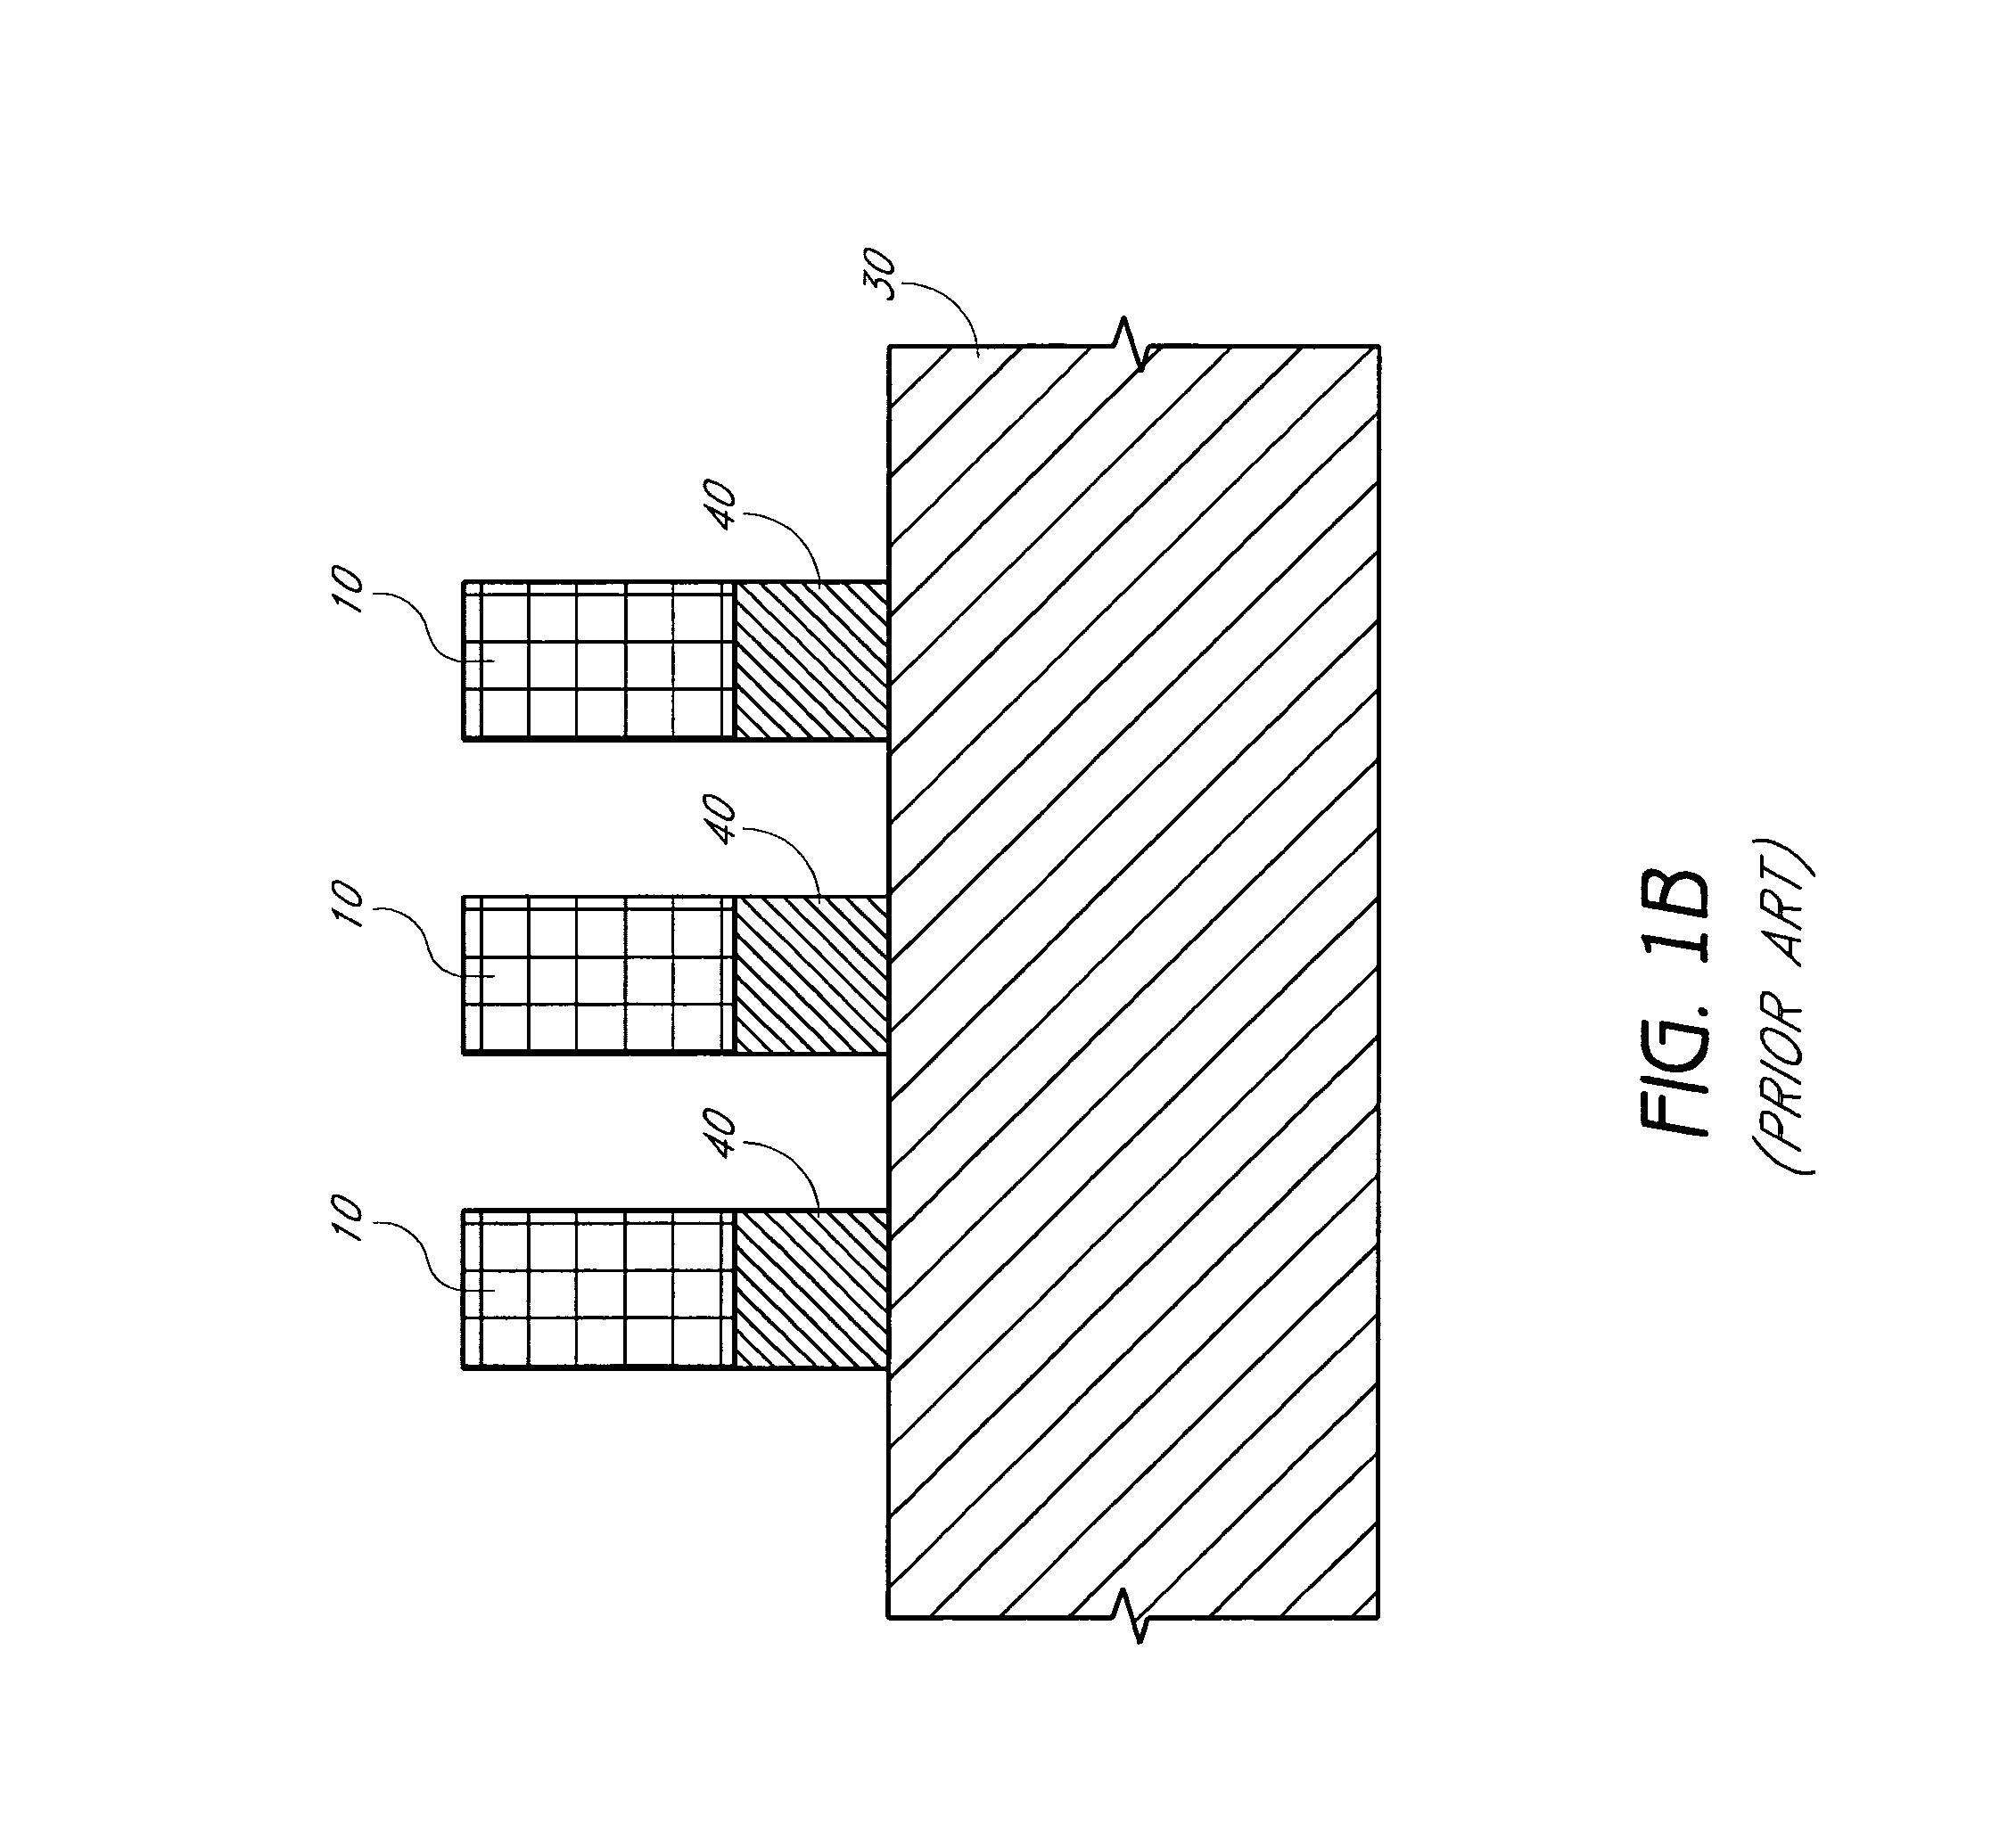 Methods for forming arrays of small, closely spaced features